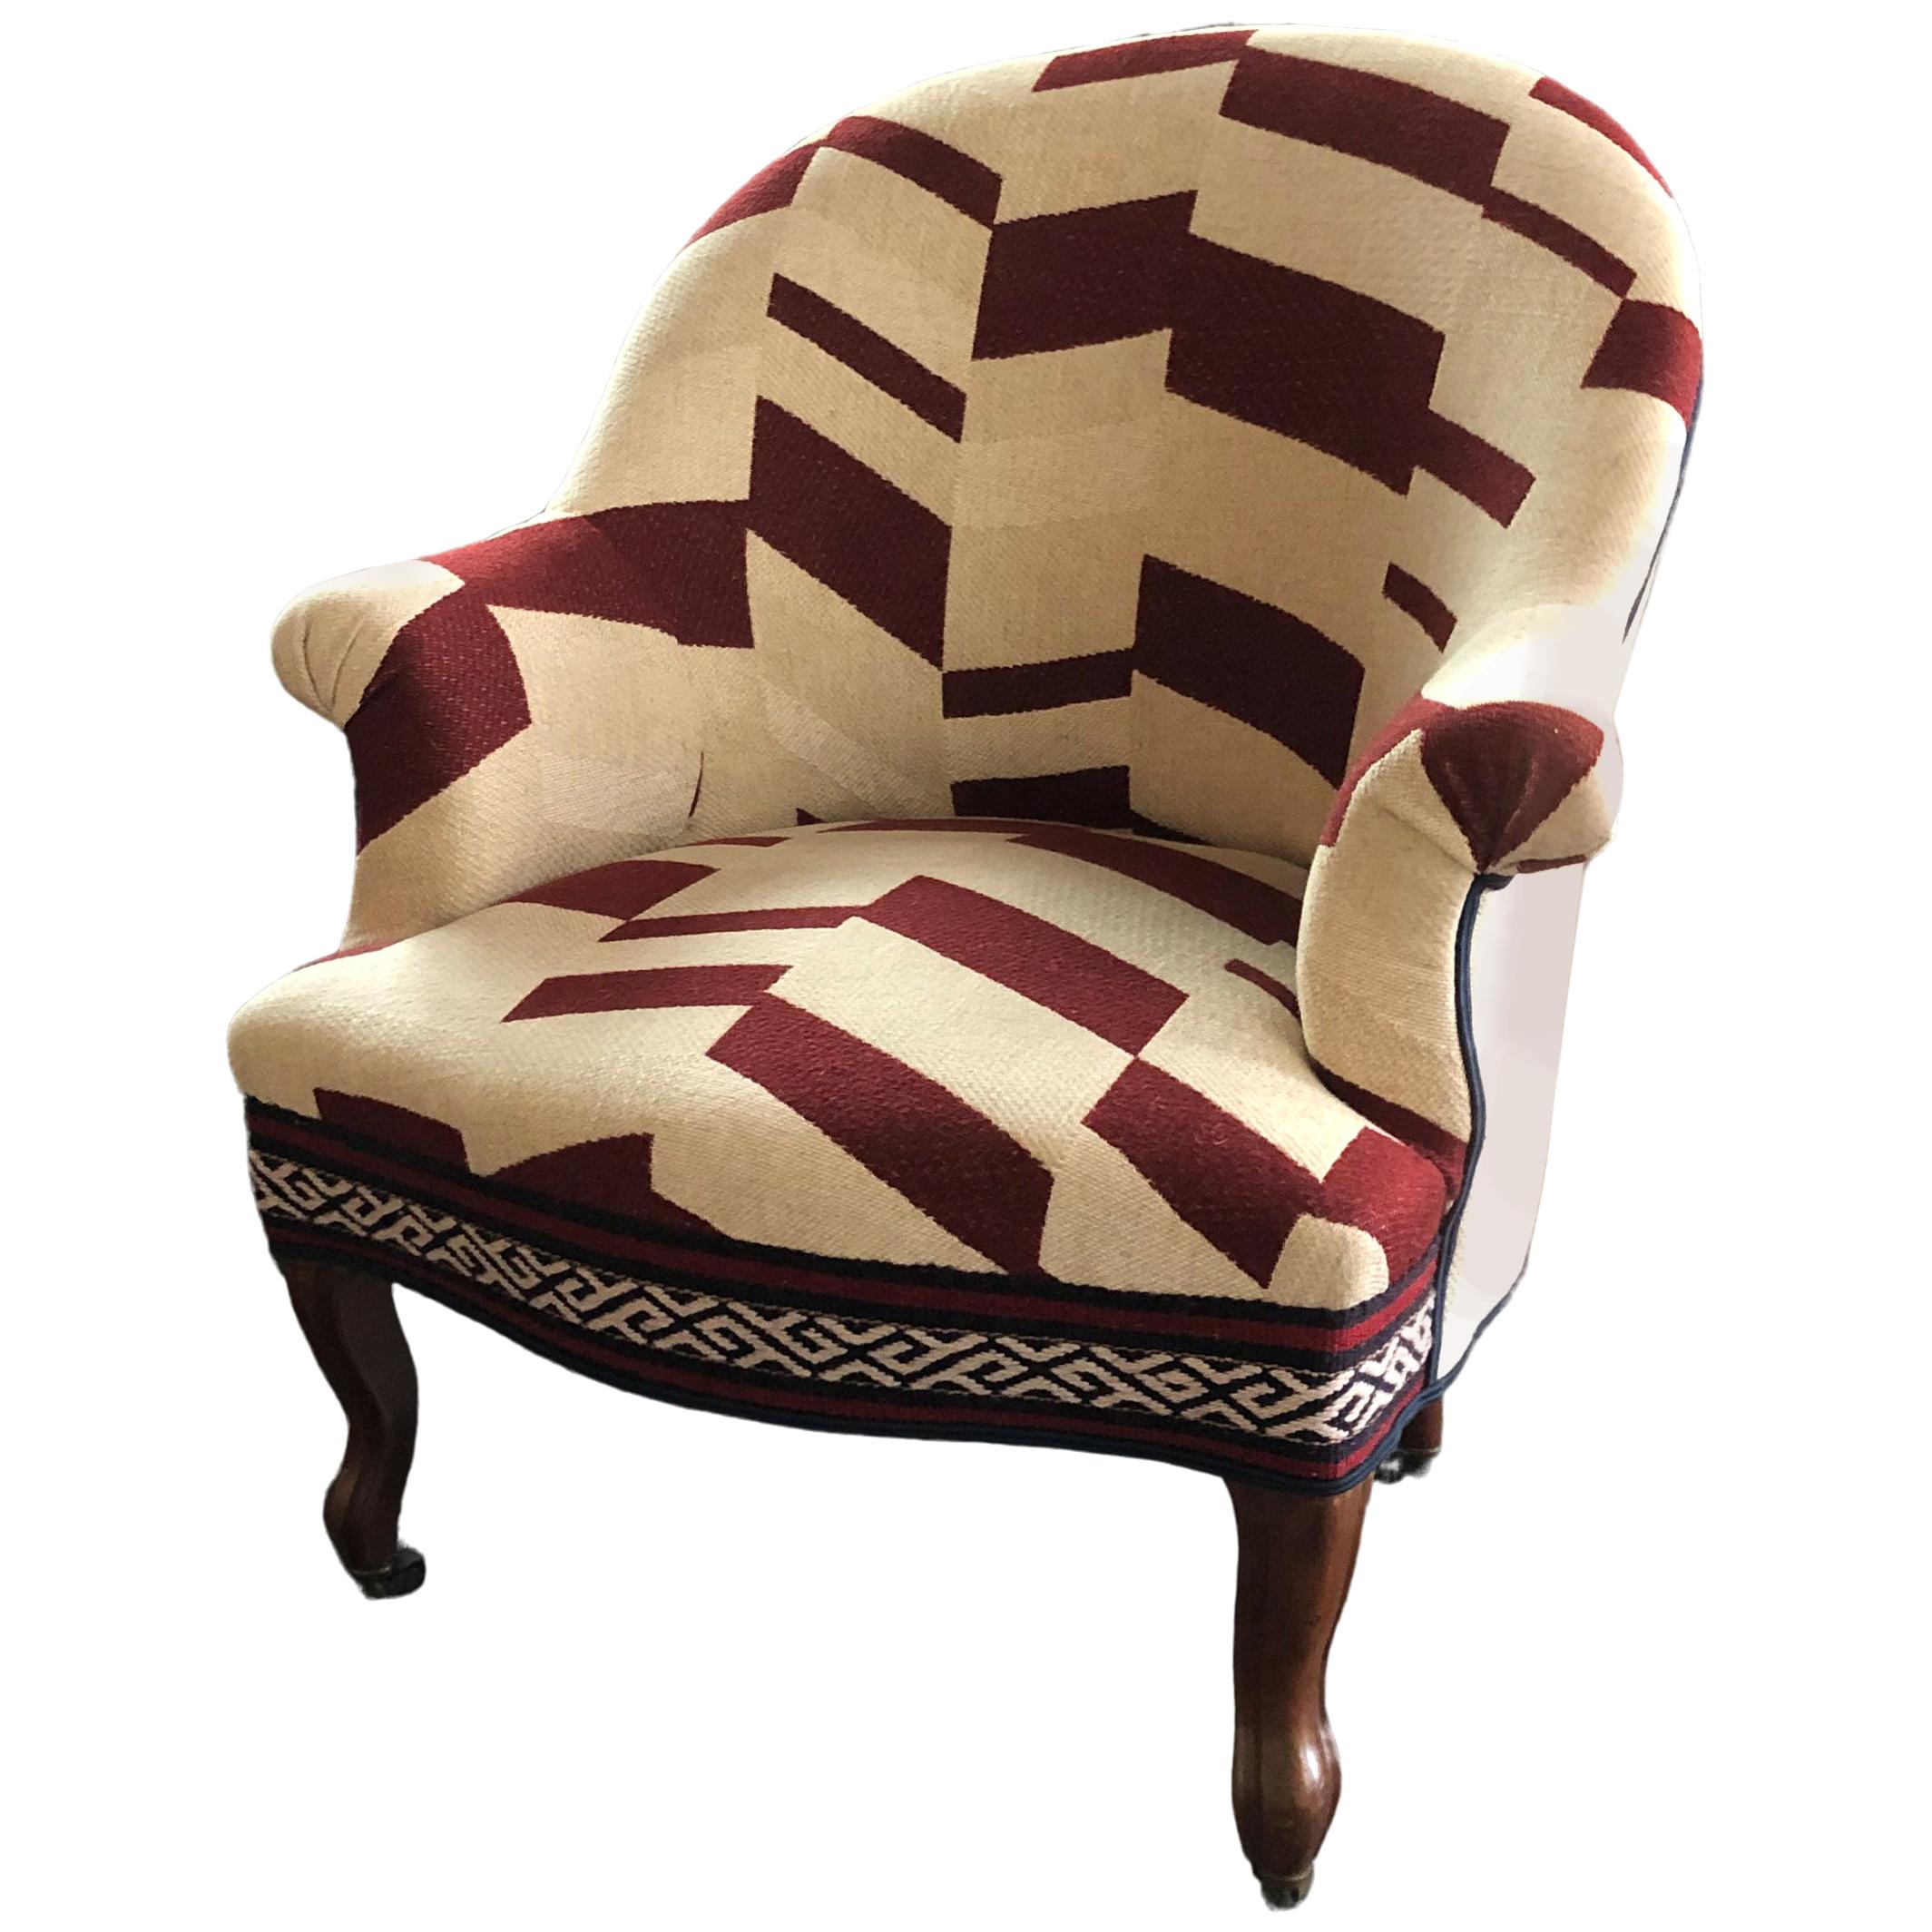 Crapaud Chair with Nobilis Fabric and Antique For Sale